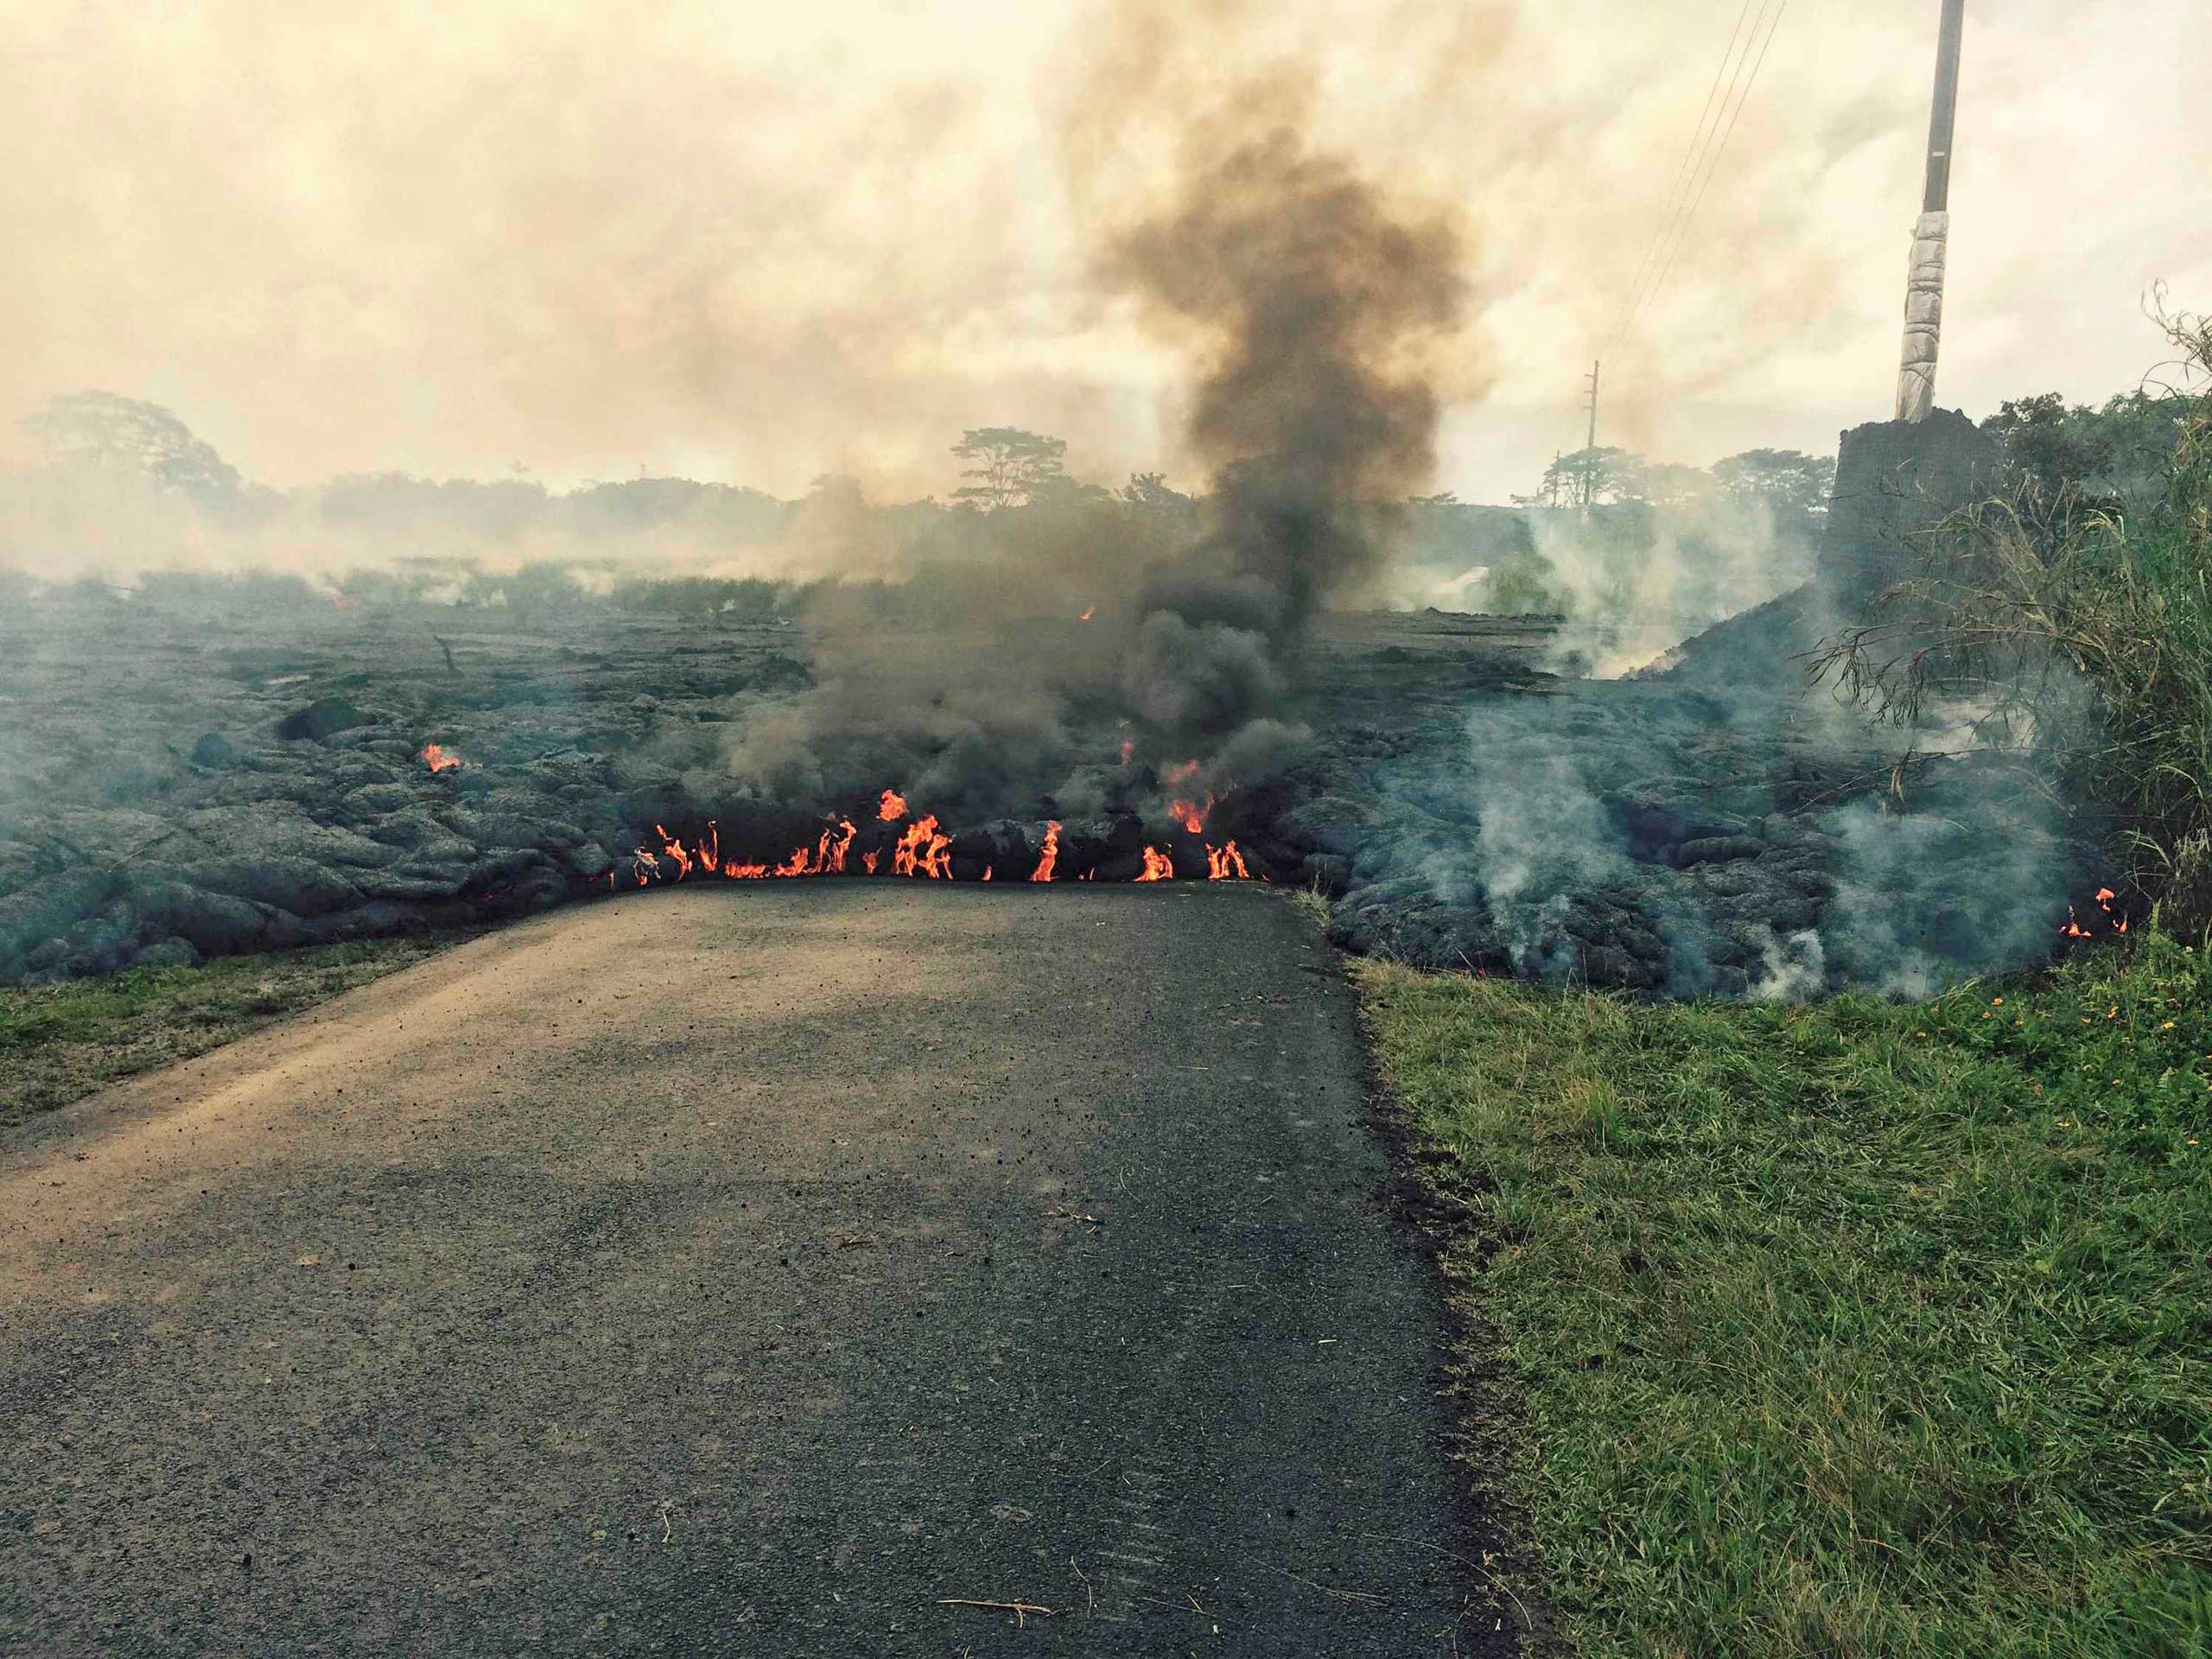 The lava flow from the Kilauea Volcano is seen crossing Apa'a Street/Cemetery Road in this U.S. Geological Survey (USGS) image taken near the village of Pahoa, Hawaii Oct. 25, 2014. (USGS/Reuters)